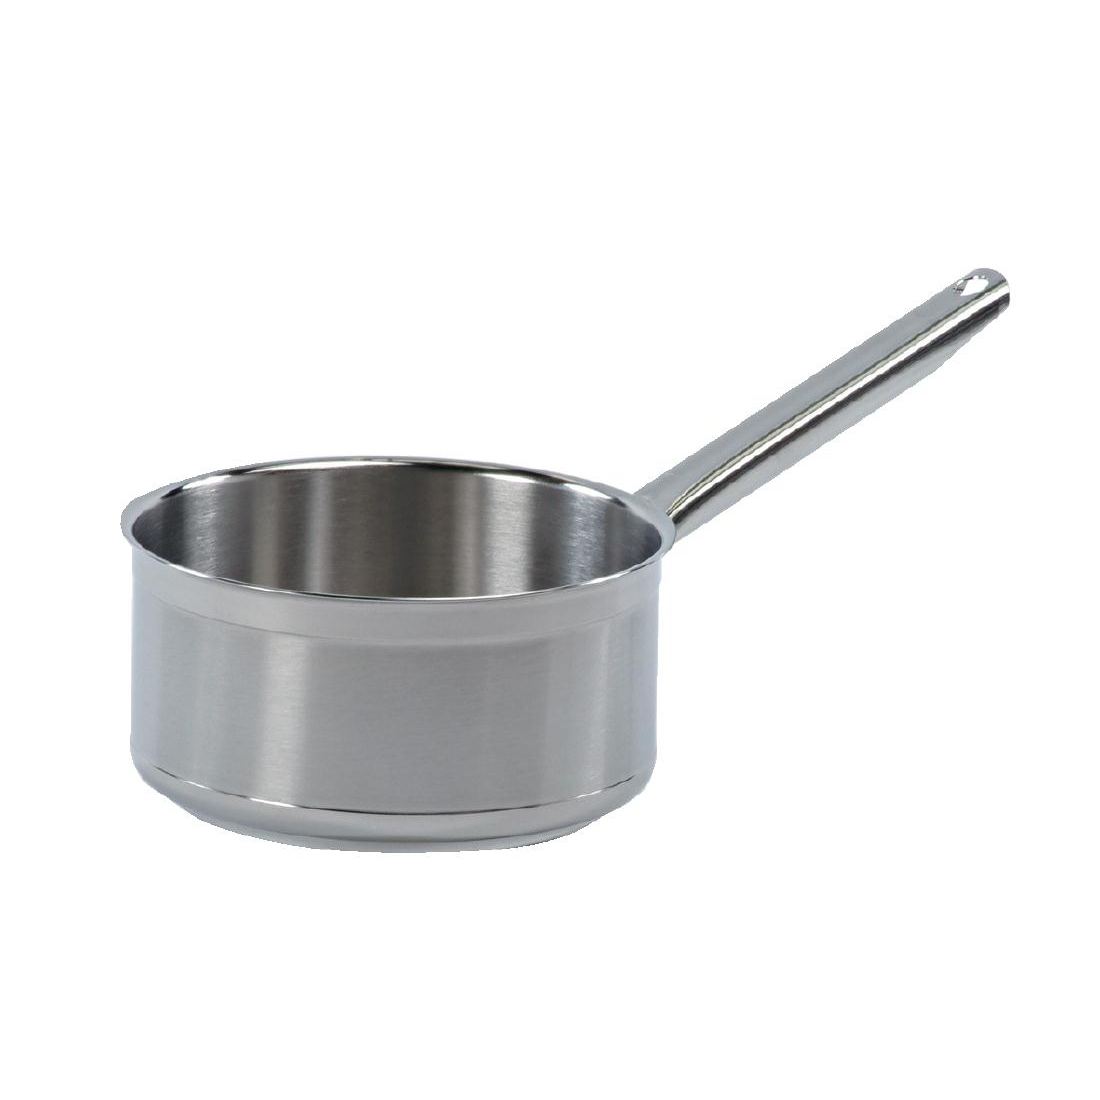 Bourgeat Tradition Plus Stainless Steel Saucepan 3.3Ltr